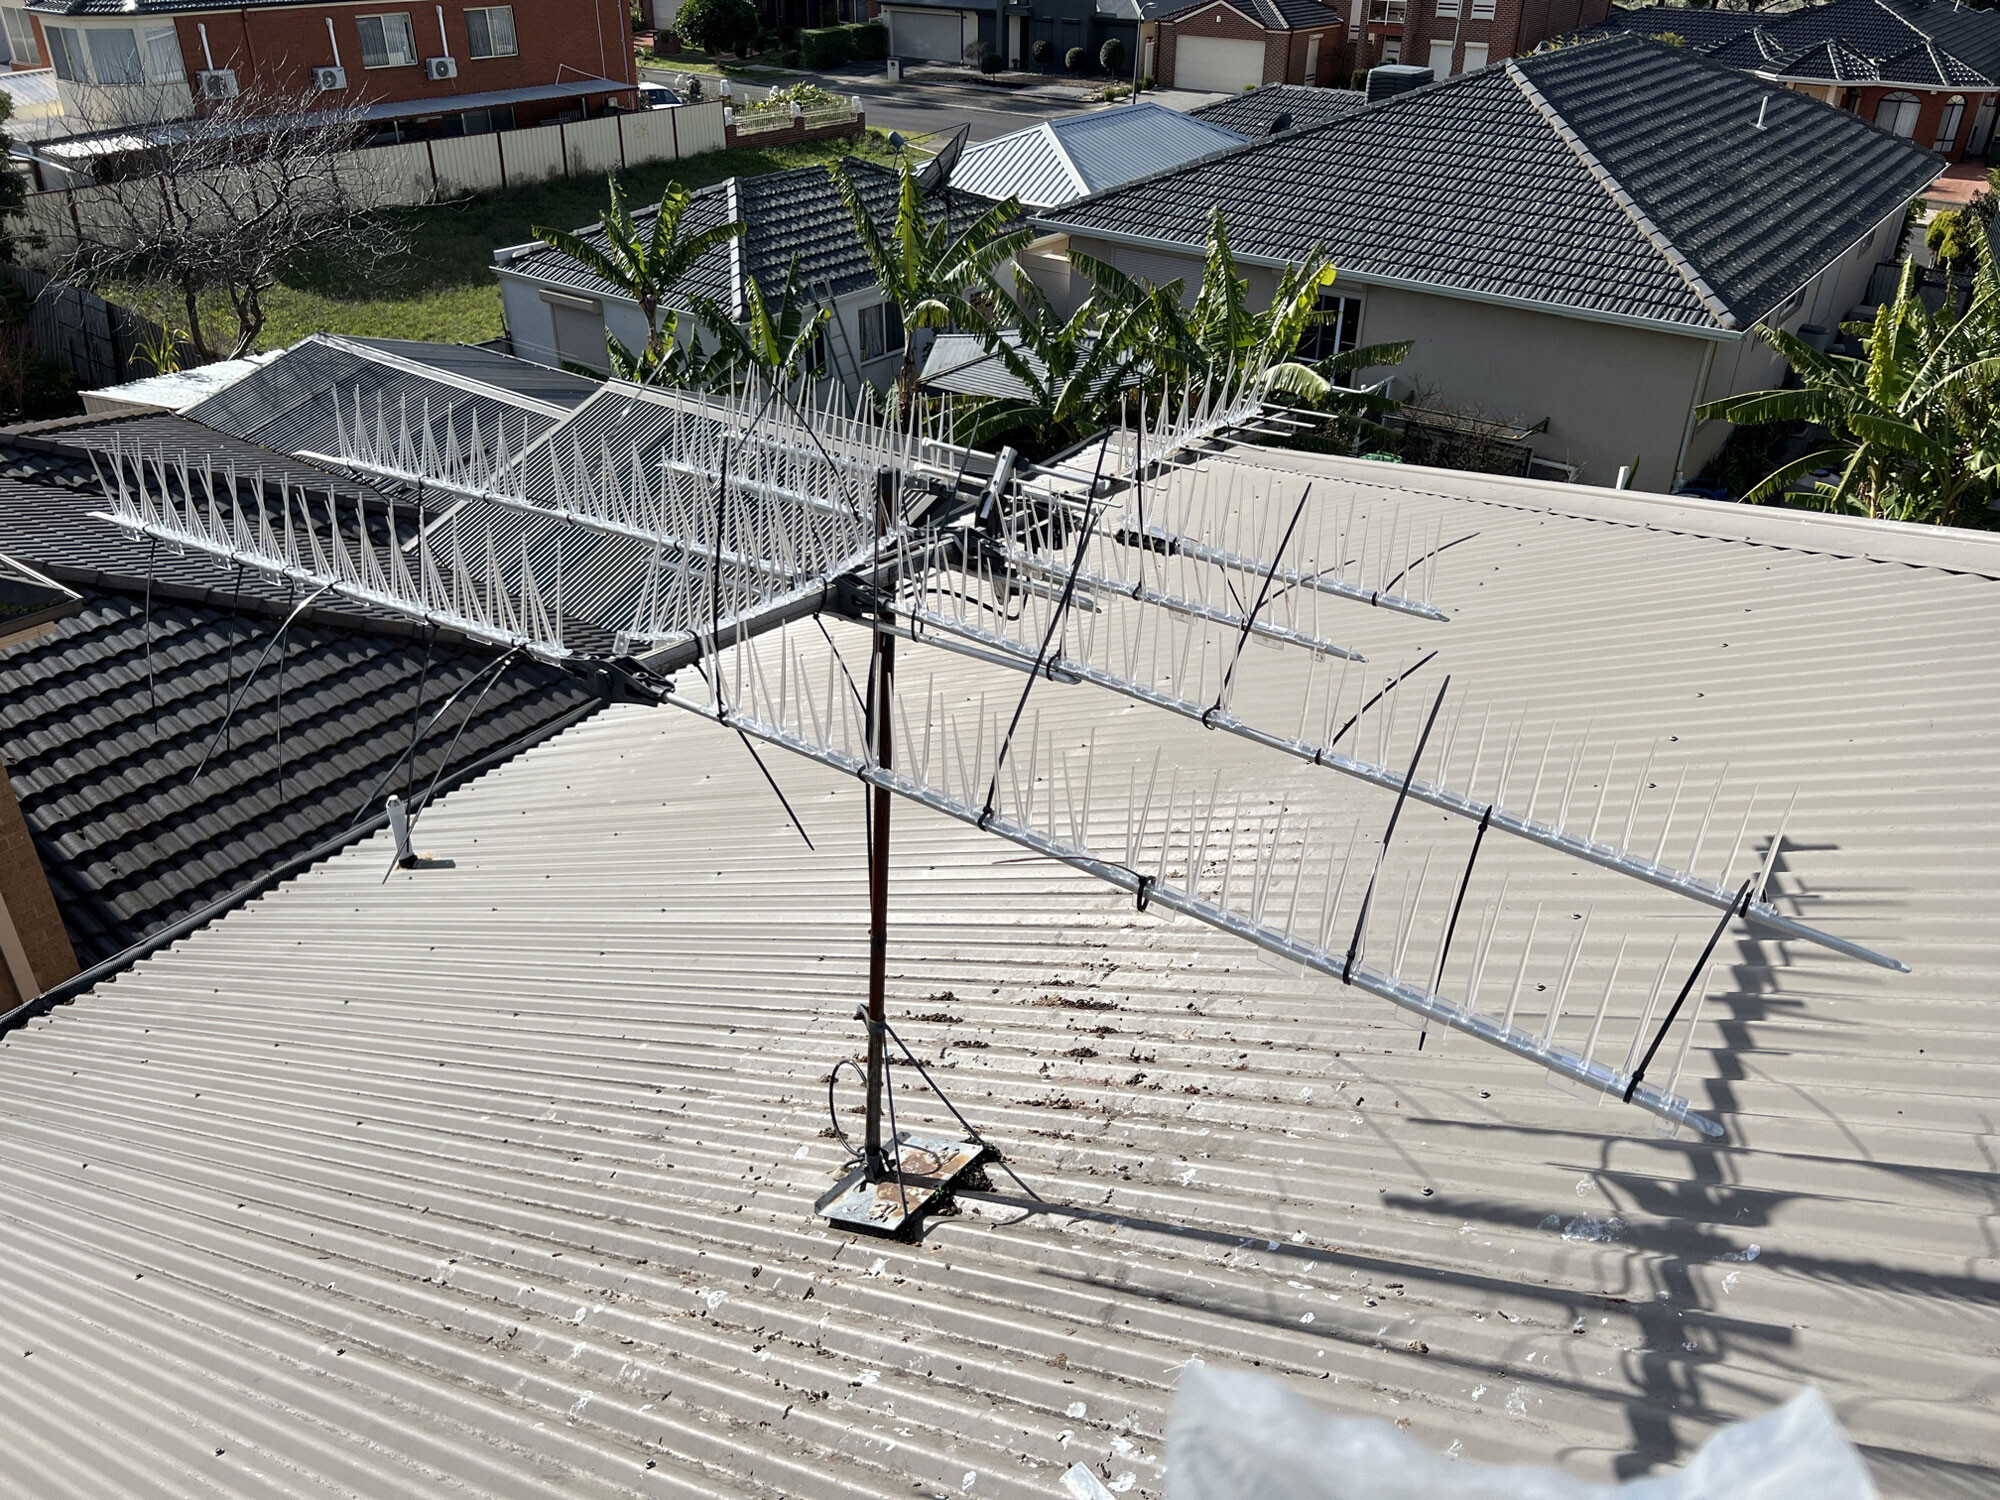 on a tin roof above an antenna that has had CleanMade bird spikes installed to prevent birds from perching